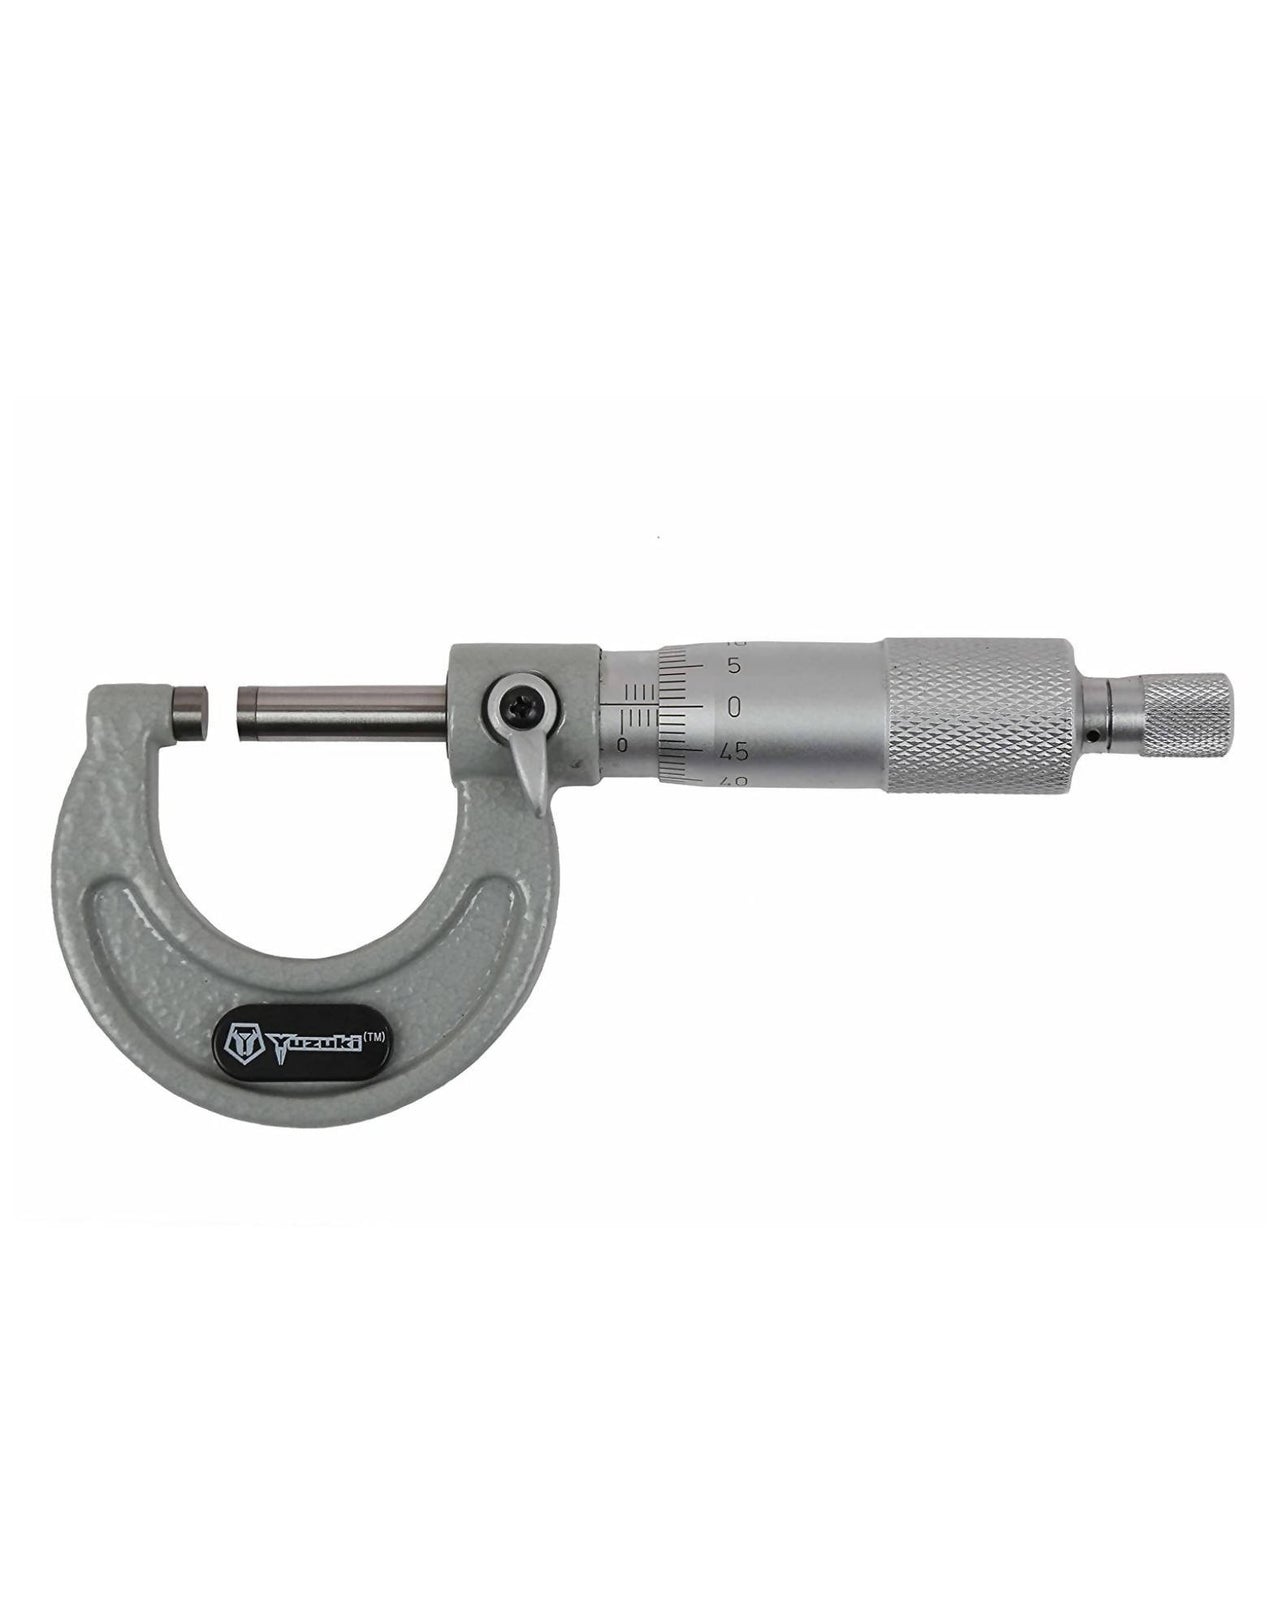 Outside Micrometer, 0-25 mm, Silver